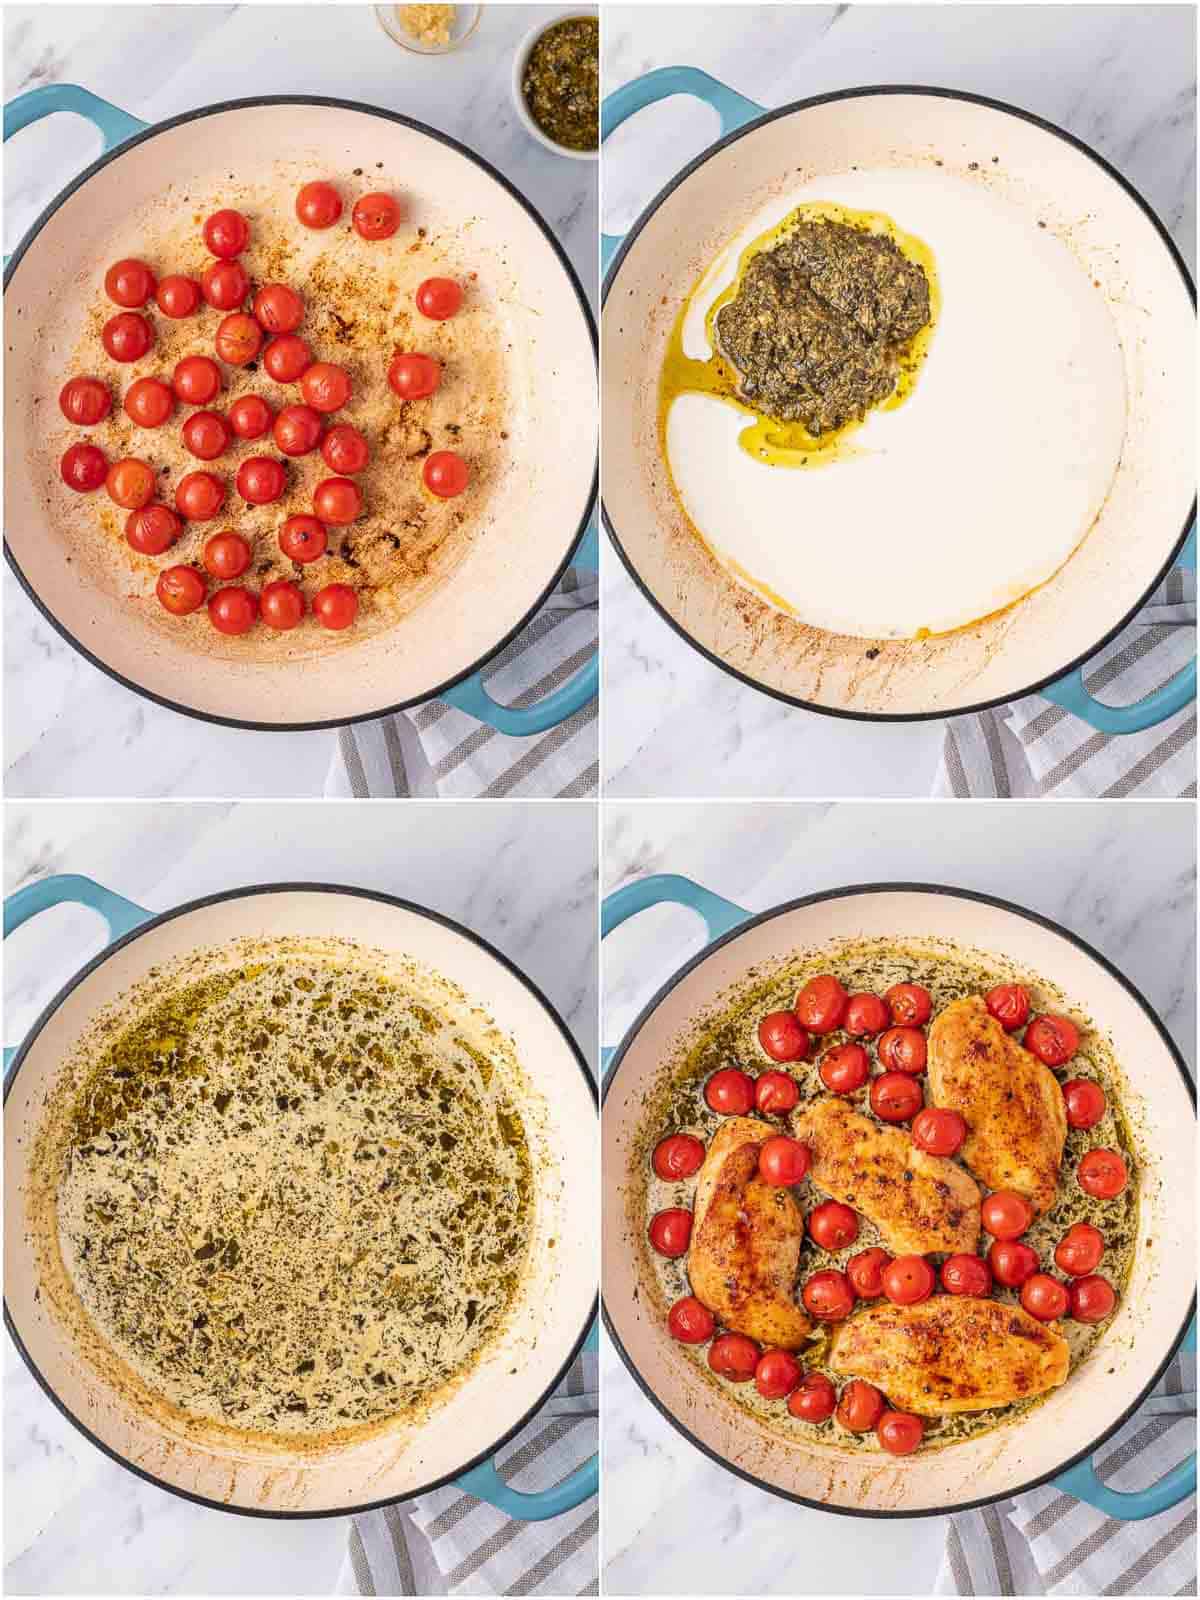 Step by step process for making pesto cream chicken.